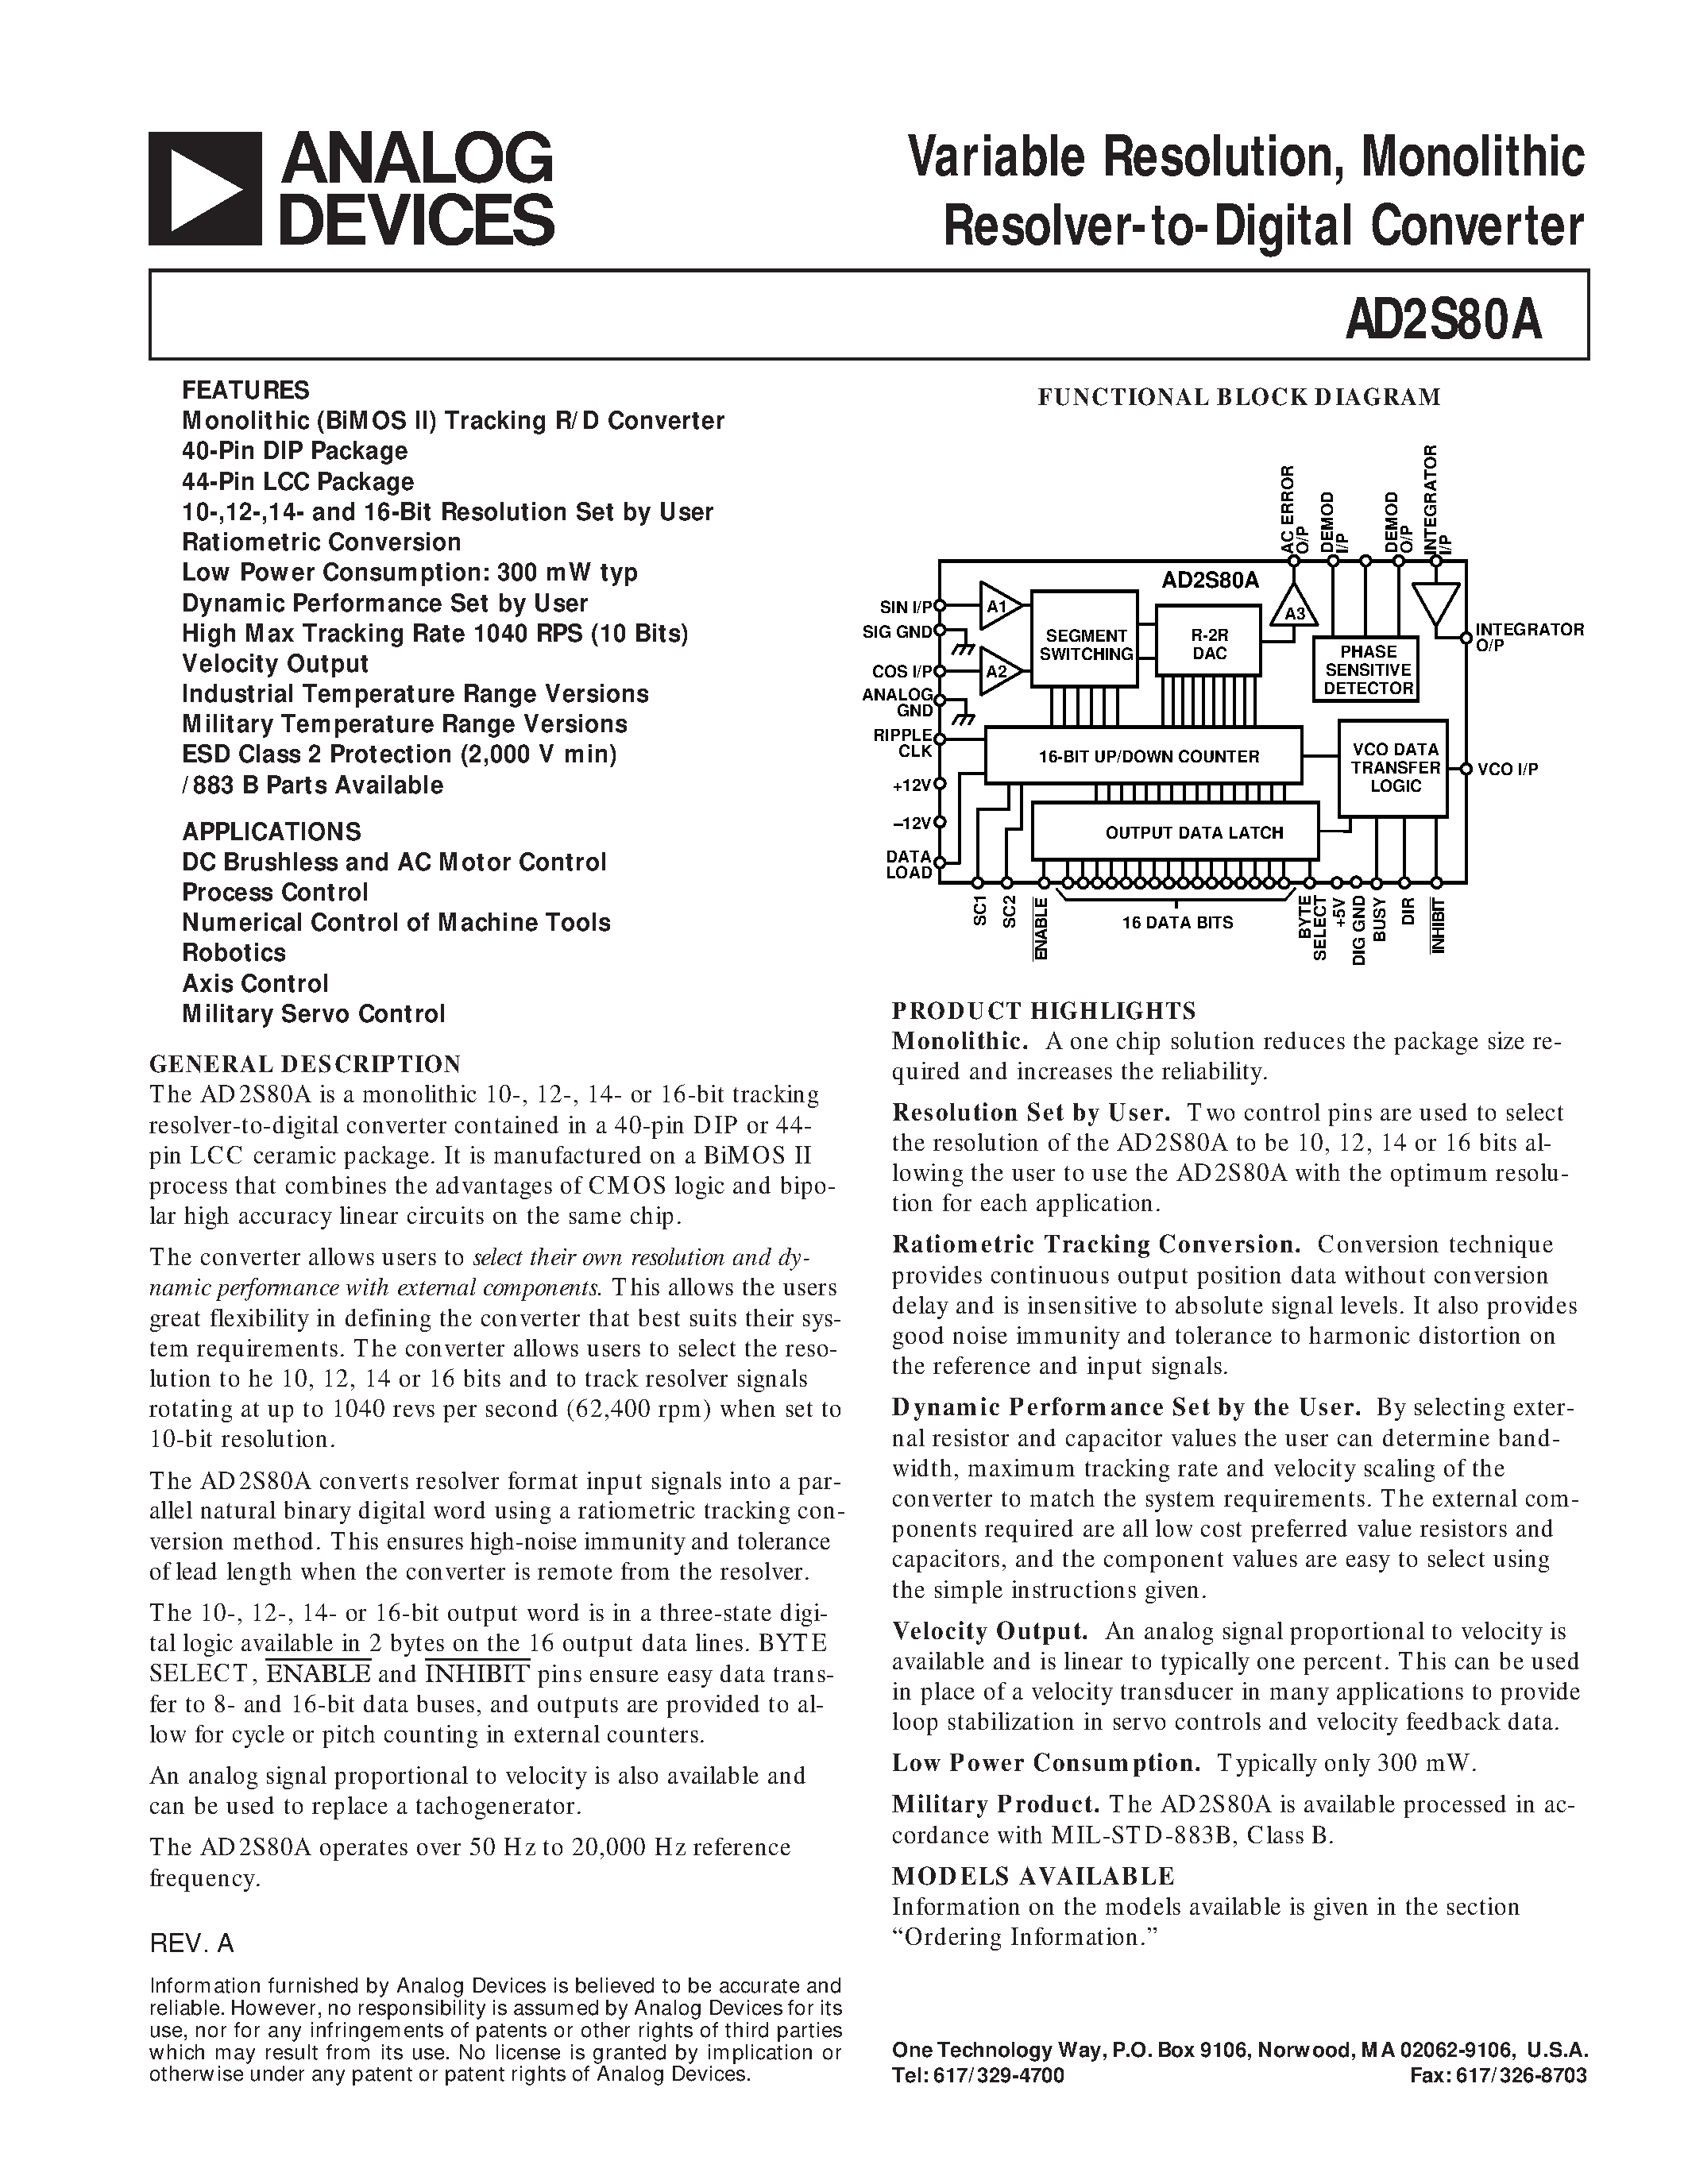 Datasheet AD2S80ASD - Variable Resolution/ Monolithic Resolver-to-Digital Converter page 1